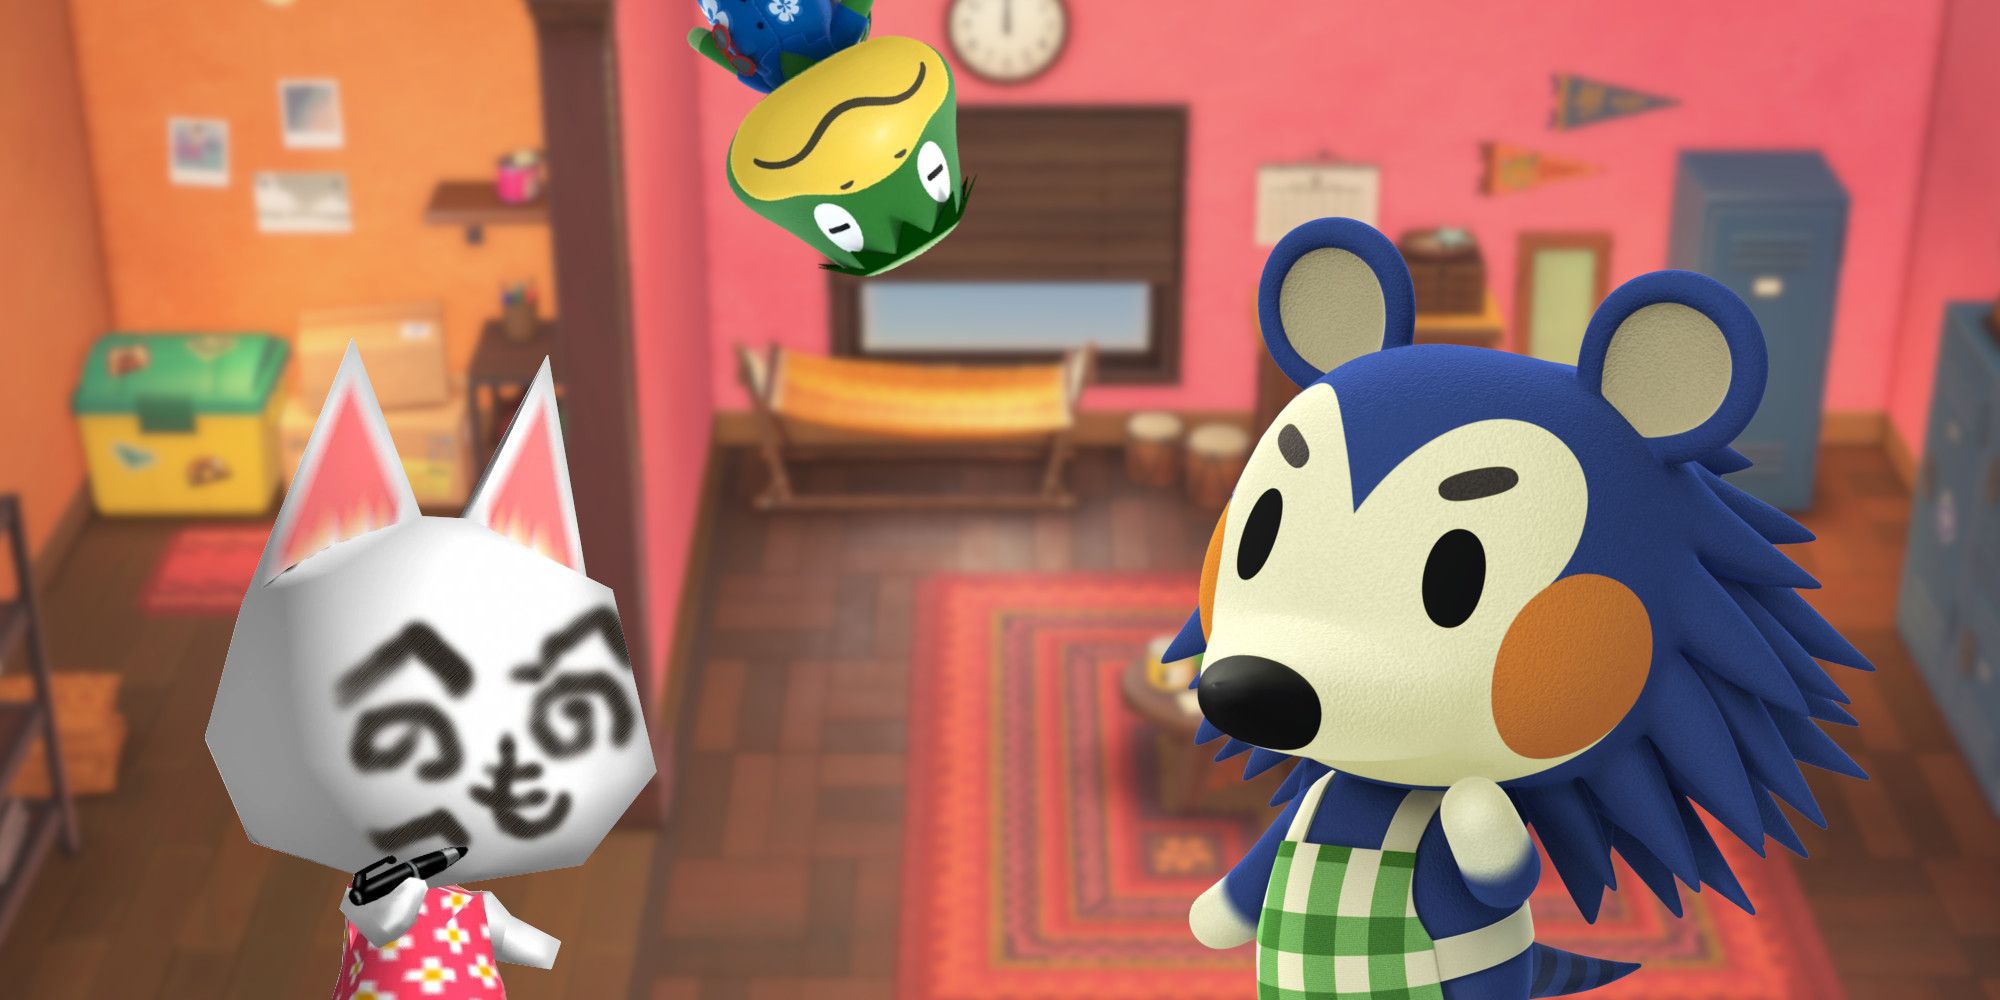 Two characters from Animal Crossing talking